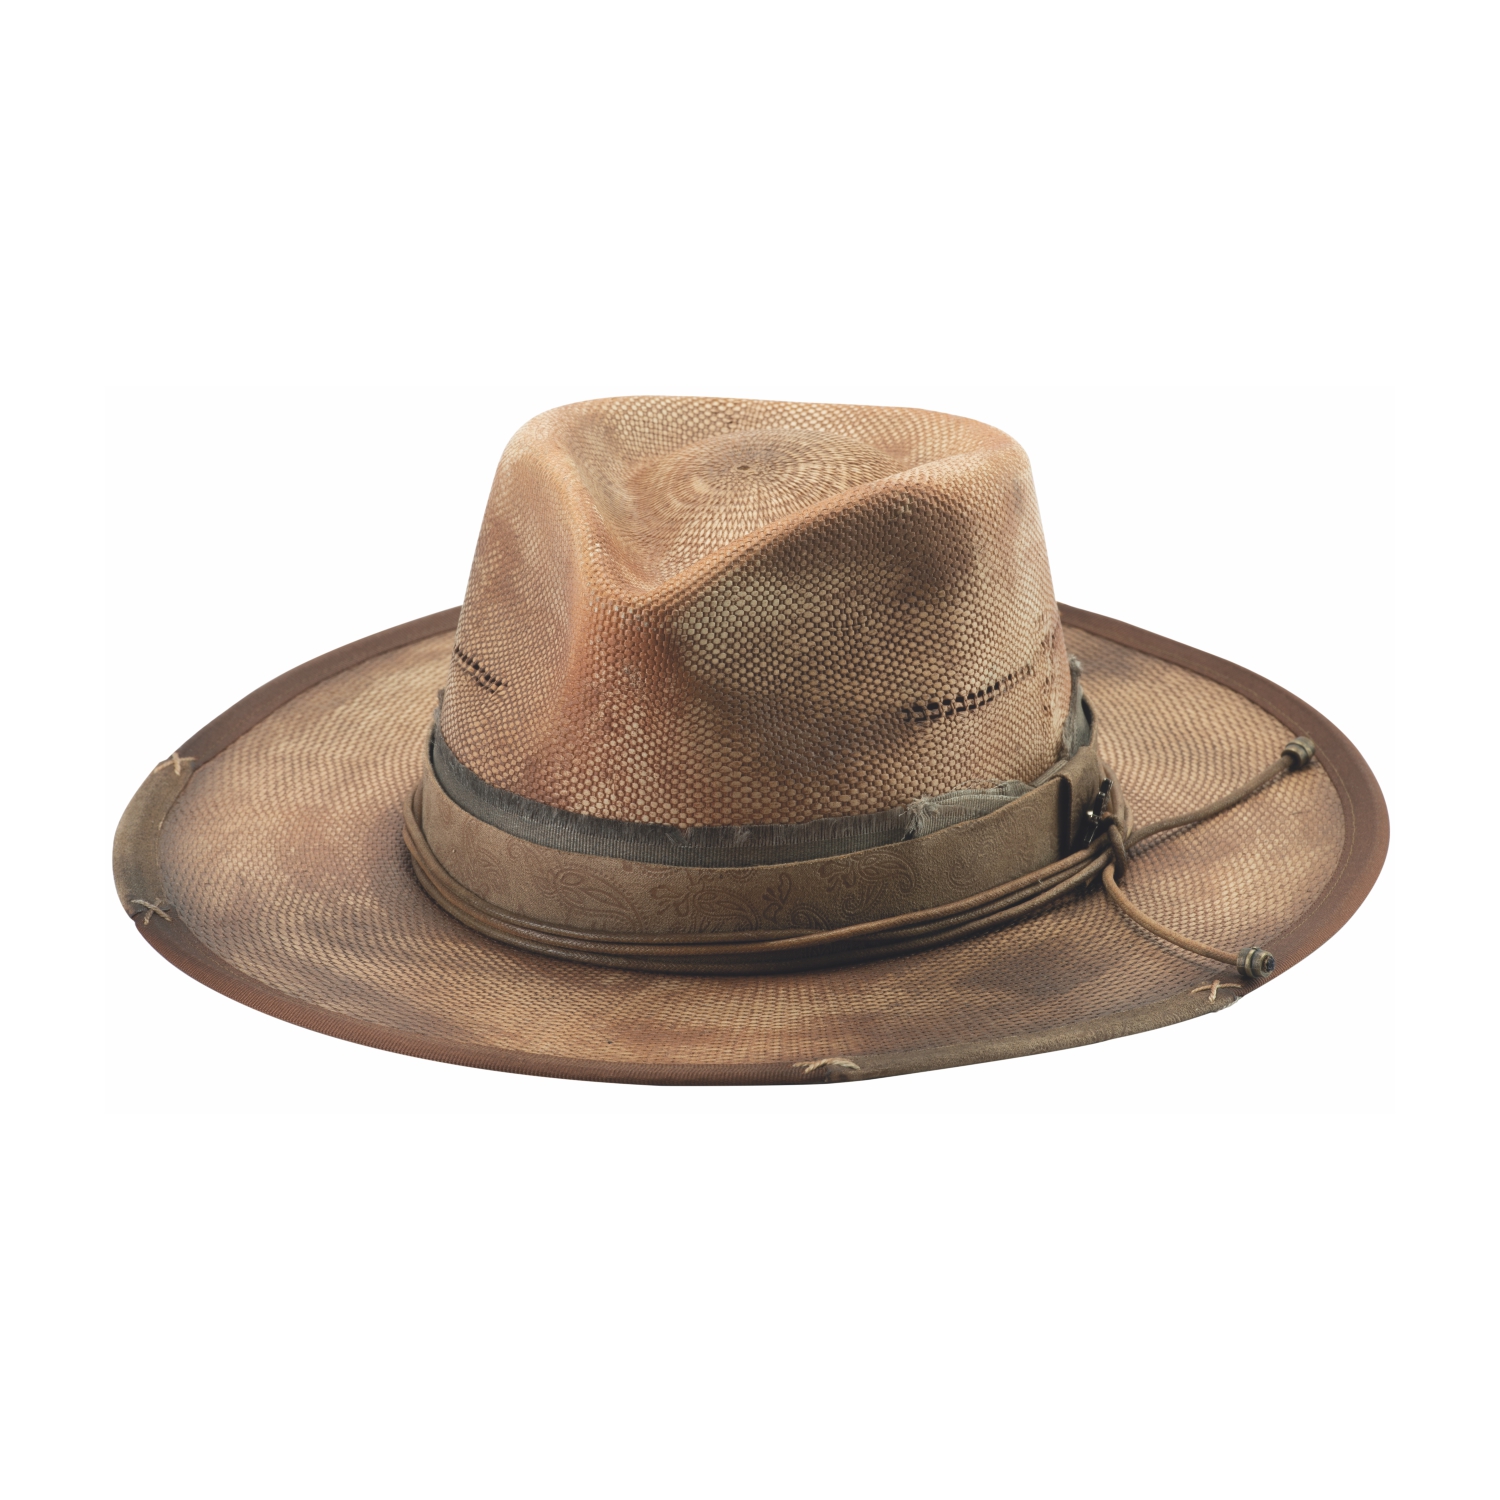 LIVING ON THE ROAD | BULLHIDE HATS